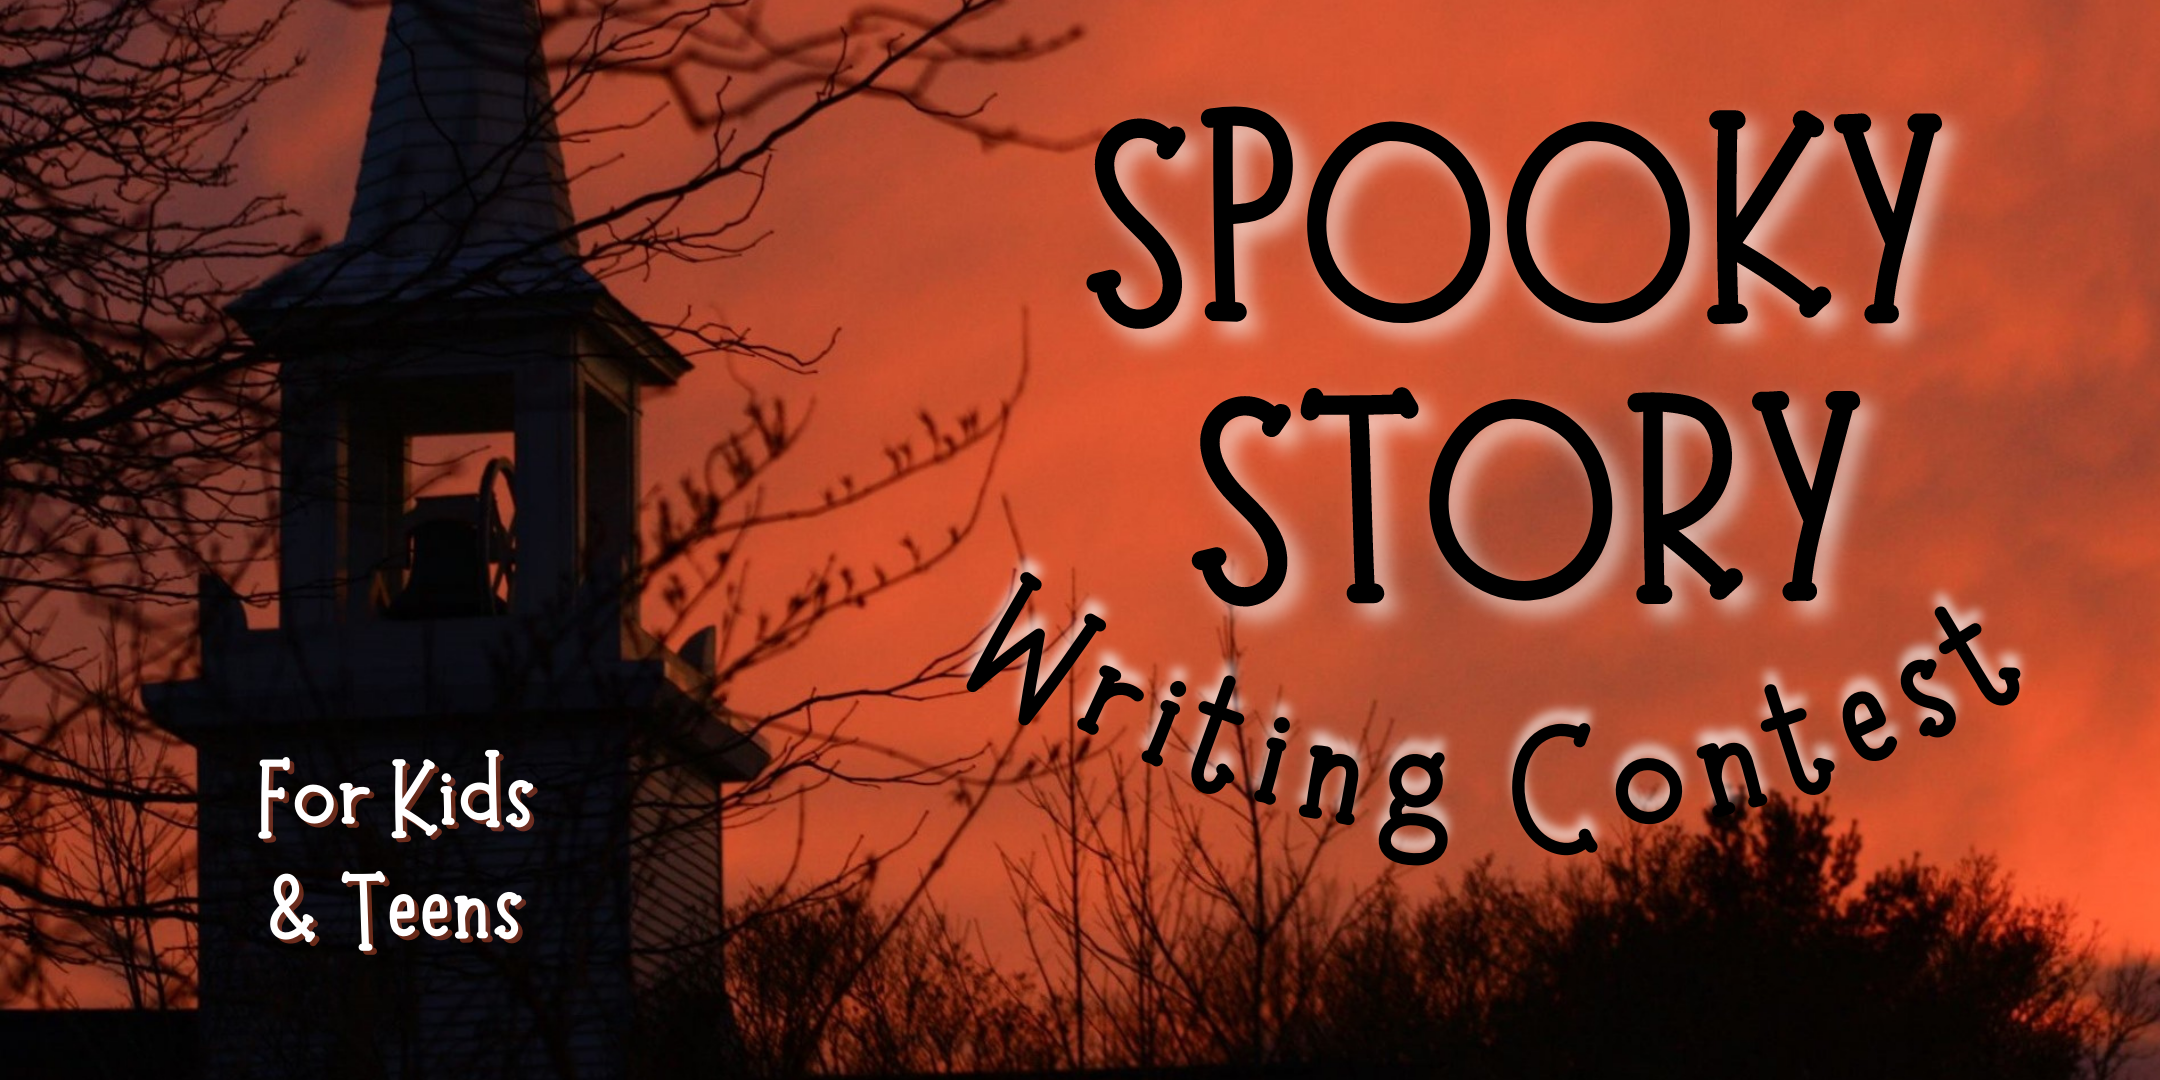 image of "Spooky Story Writing Contest for Kids & Teens"